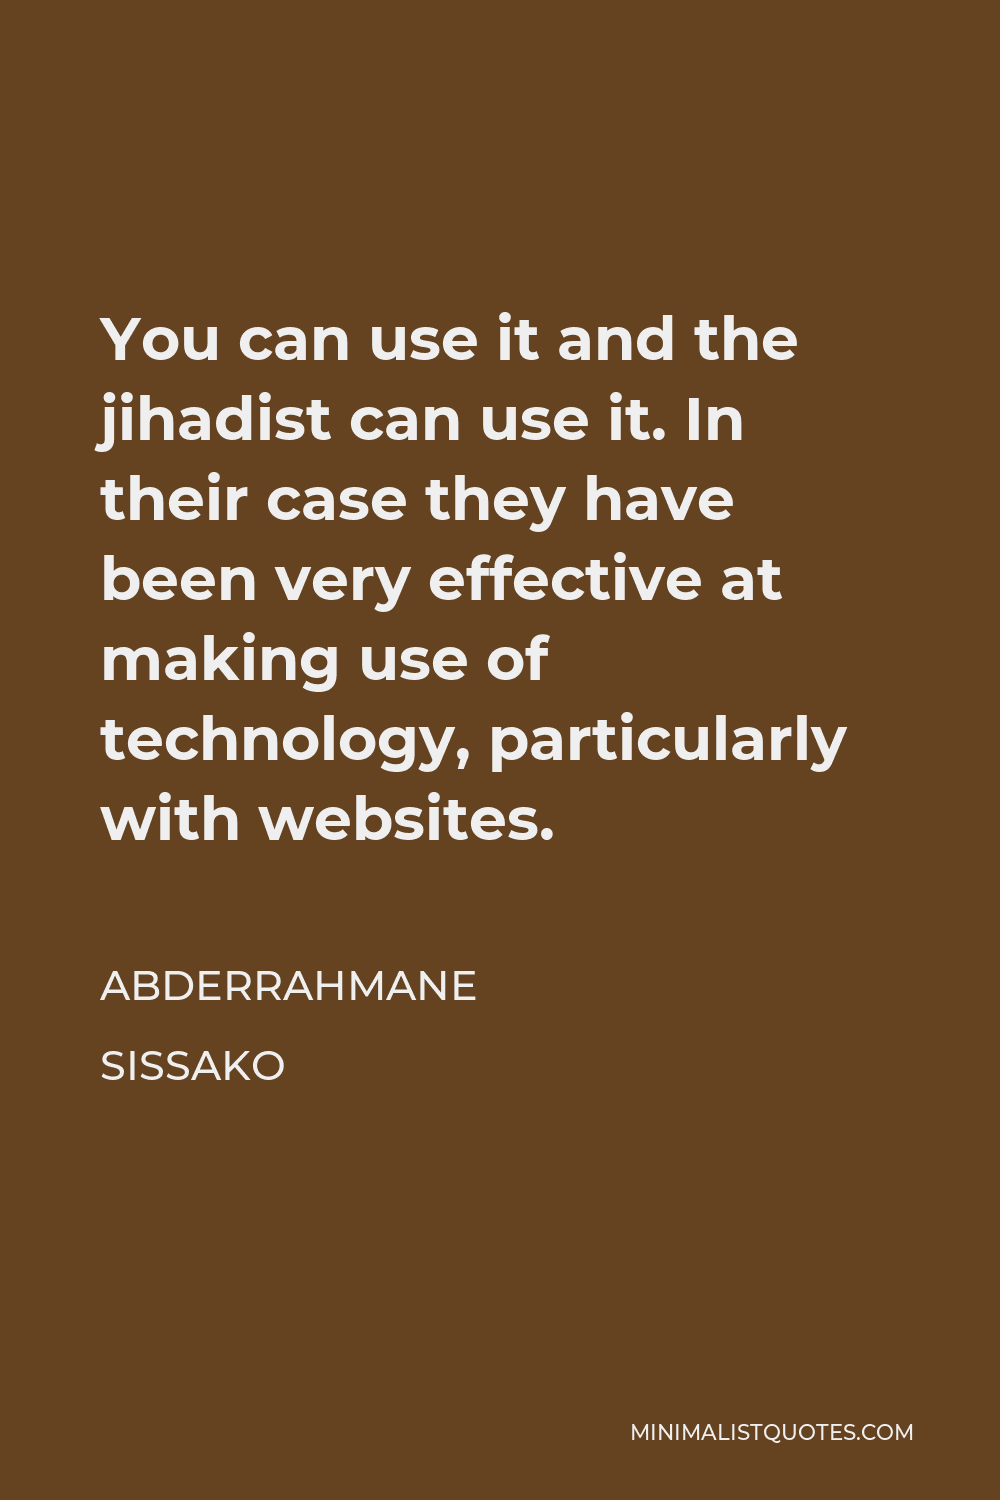 Abderrahmane Sissako Quote - You can use it and the jihadist can use it. In their case they have been very effective at making use of technology, particularly with websites.